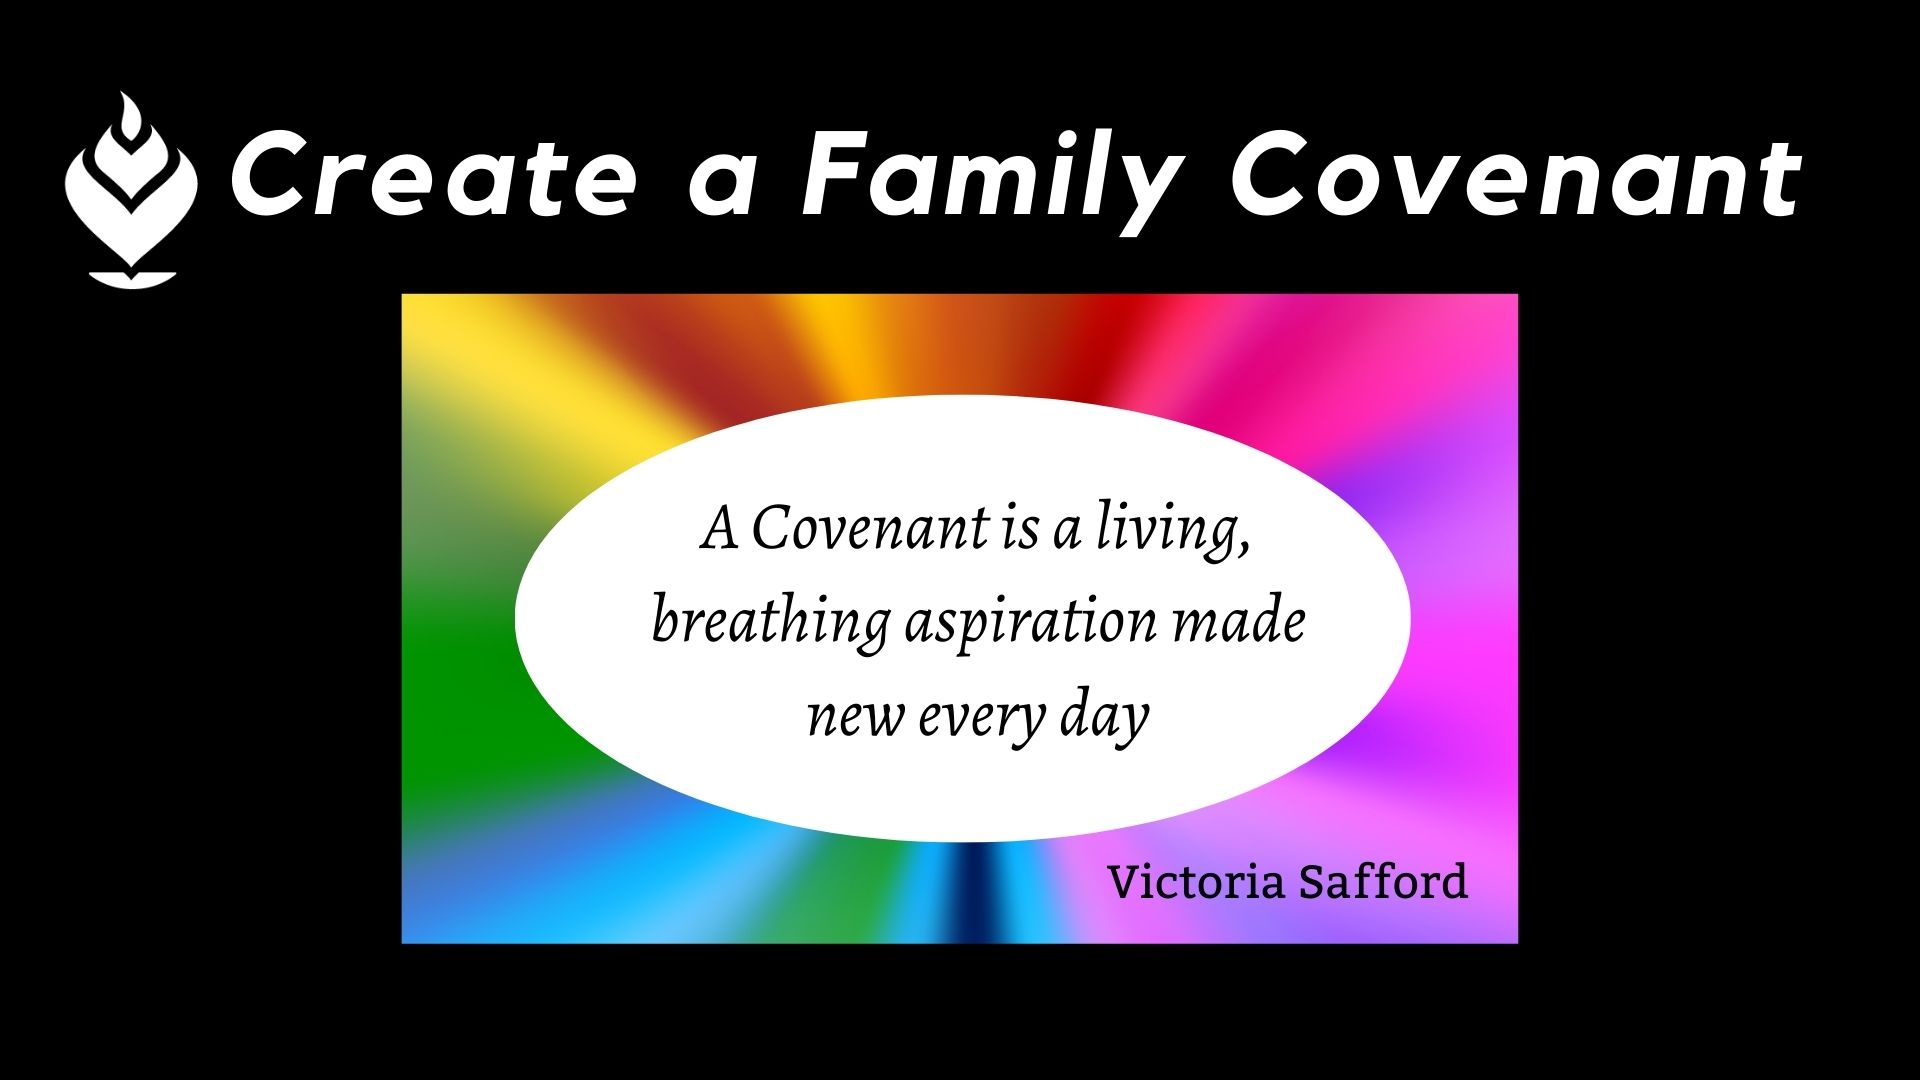 Create a Family Covenant